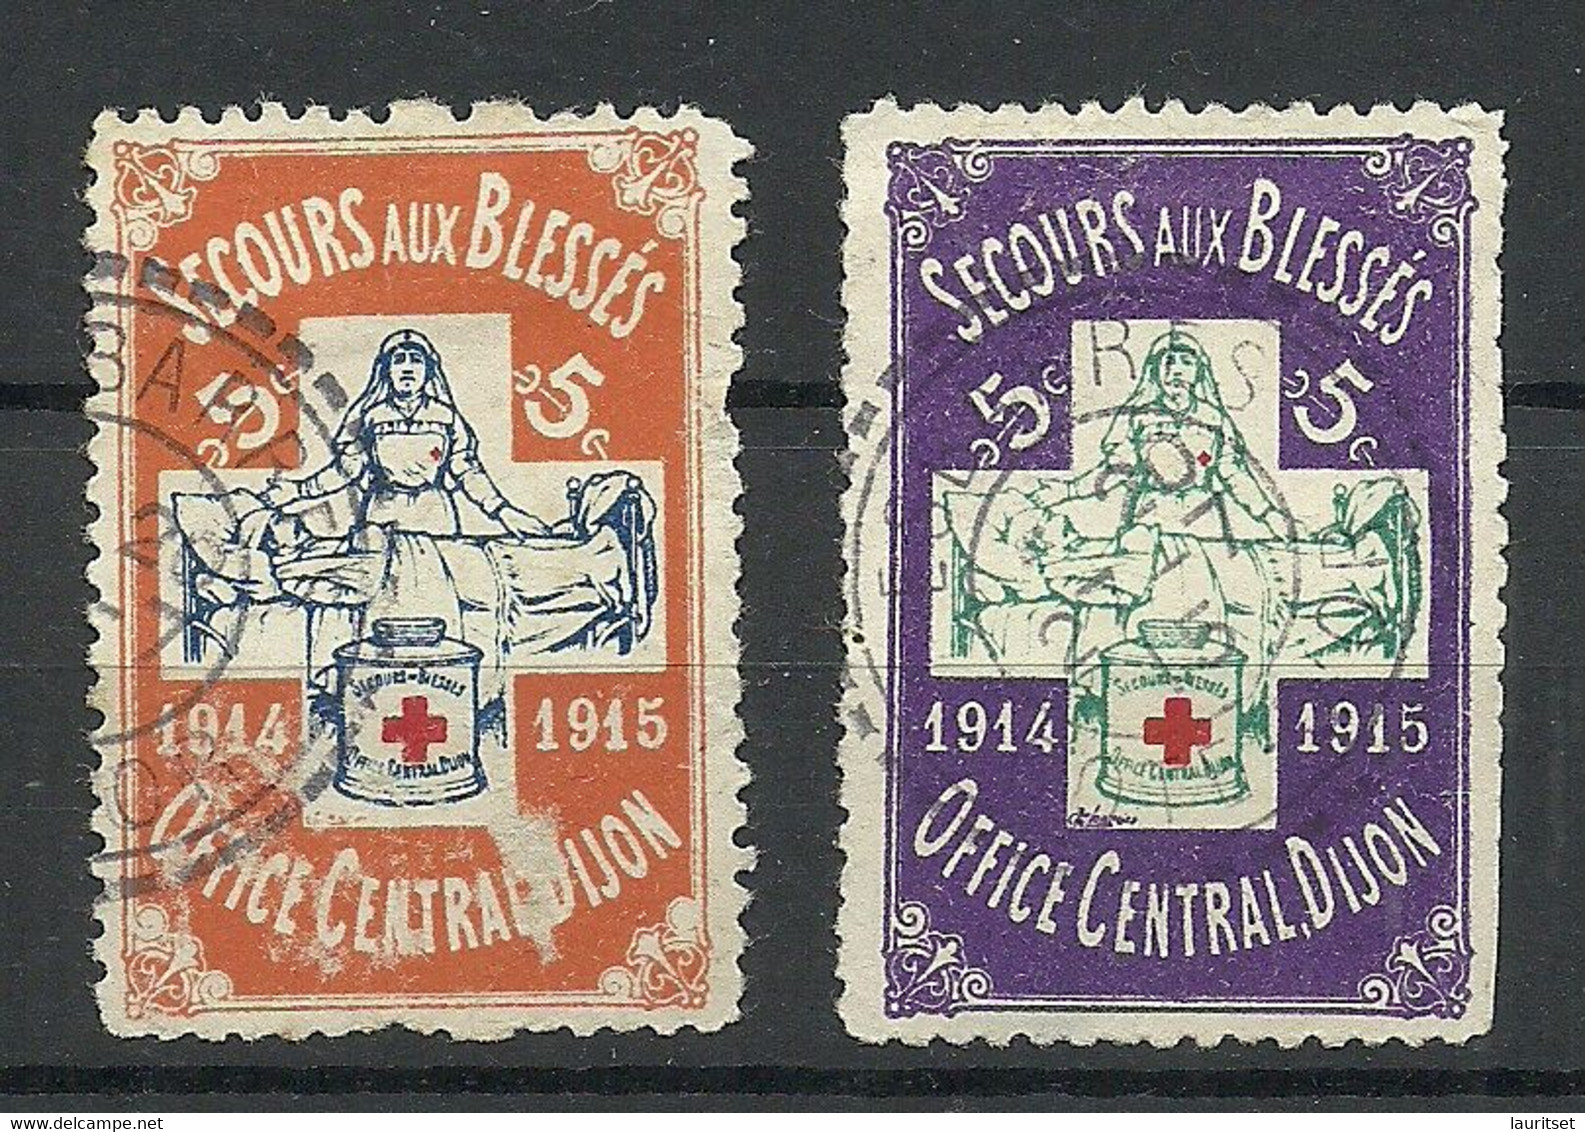 FRANCE 1914/1915 Secours Aux Blesses Office Central Dijon Red Cross Vignettes Advertising Stamps O NB! Faults! - Croix Rouge